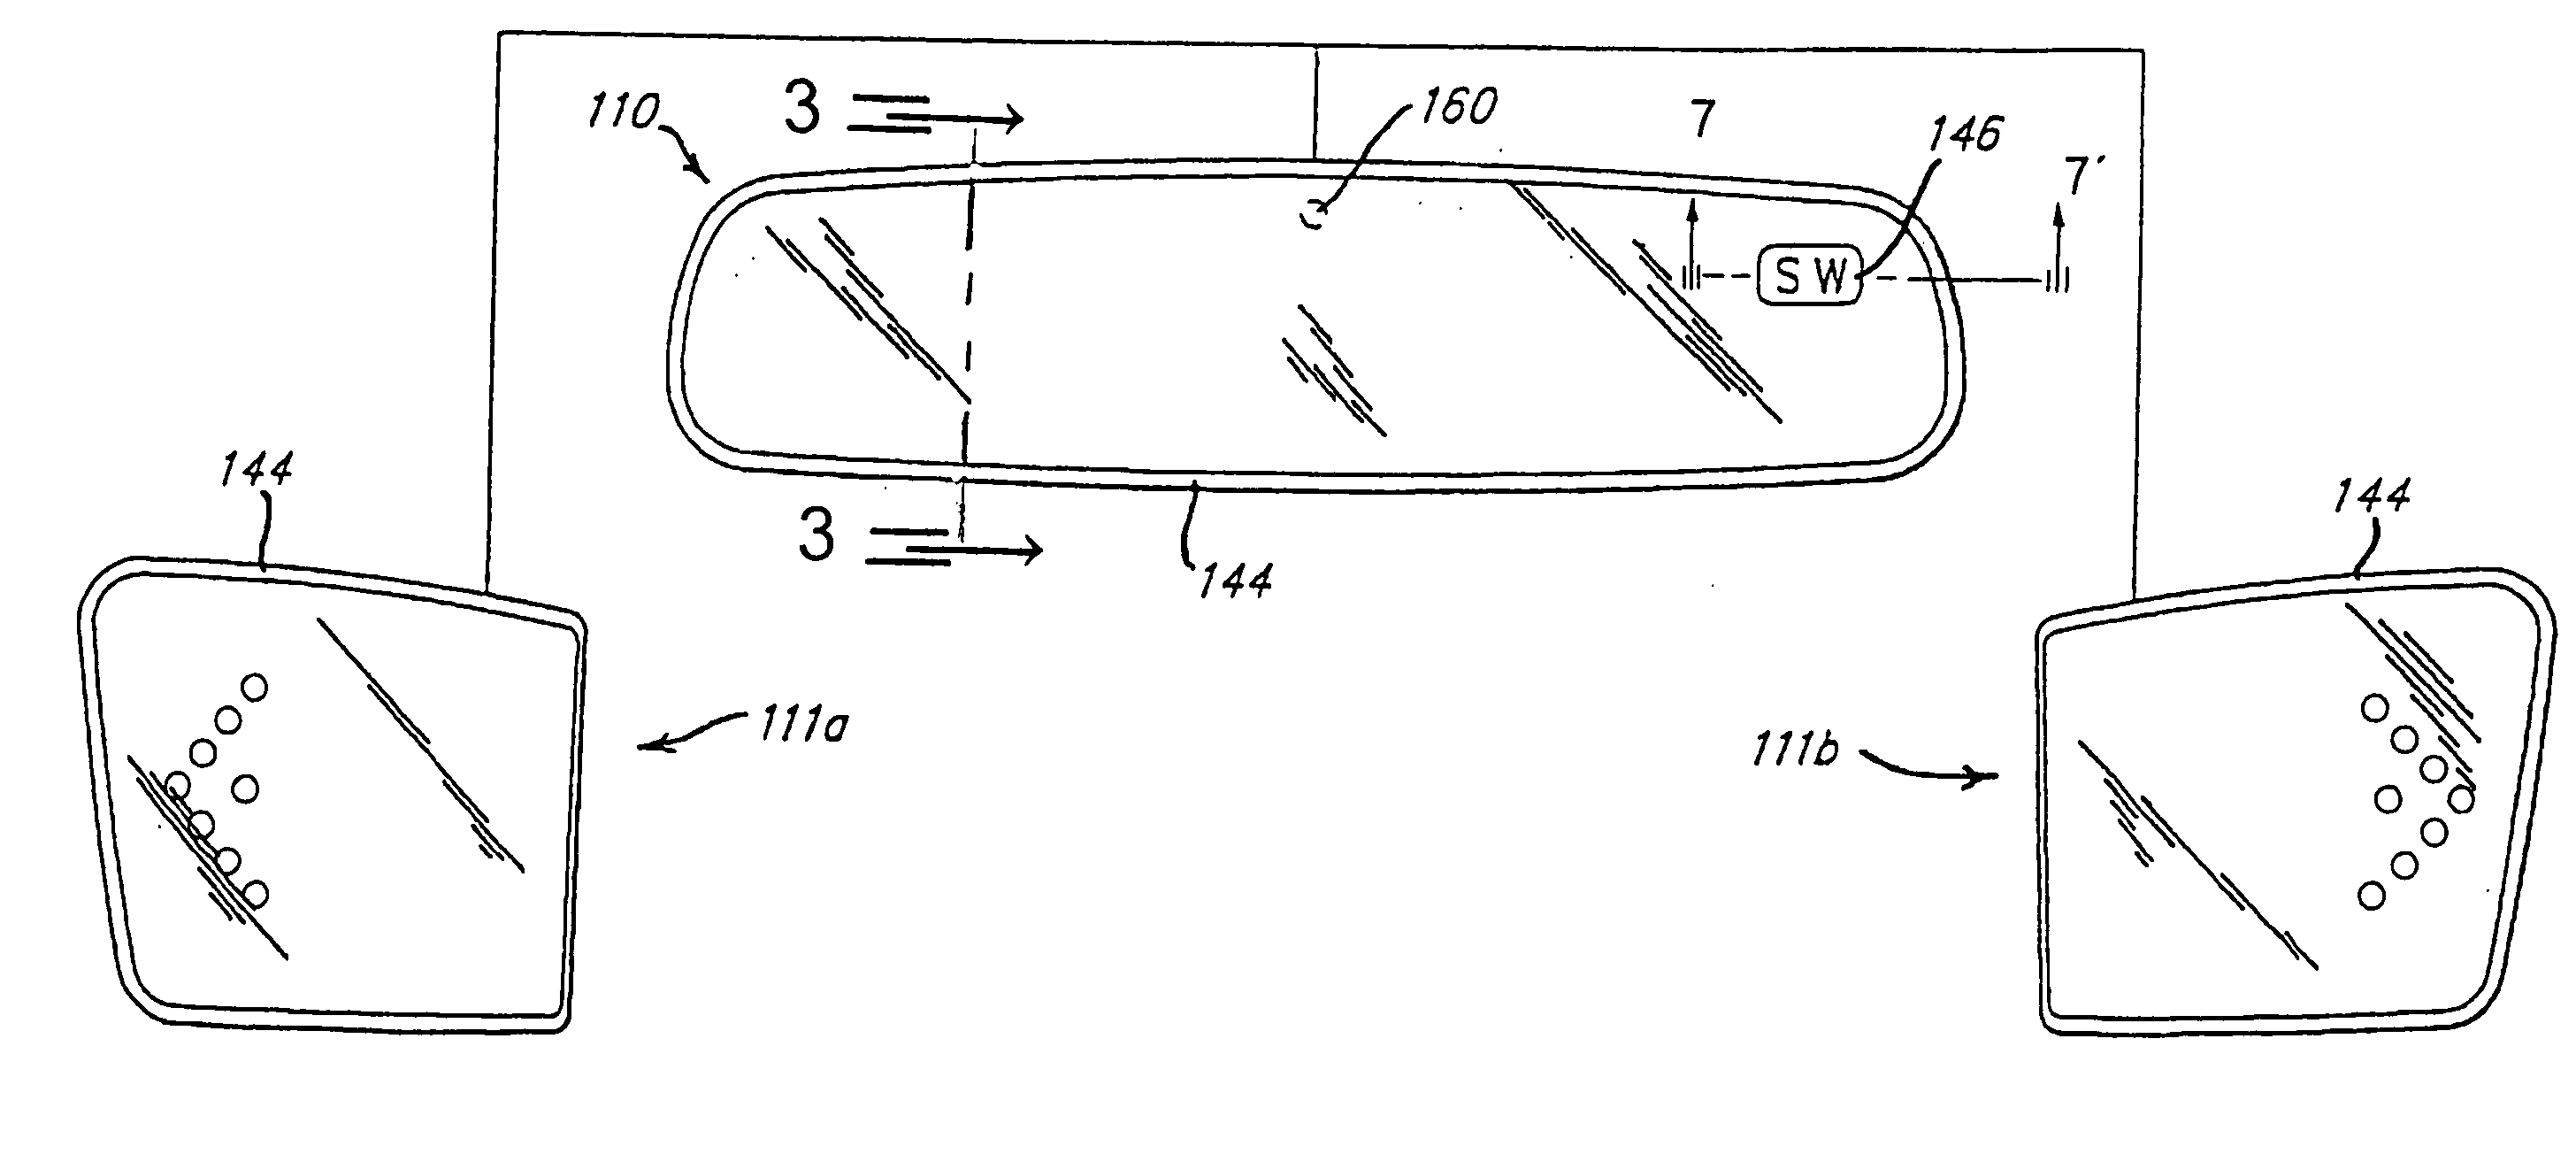 Electrochromic rearview mirror incorporating a third surface partially transmissive reflector